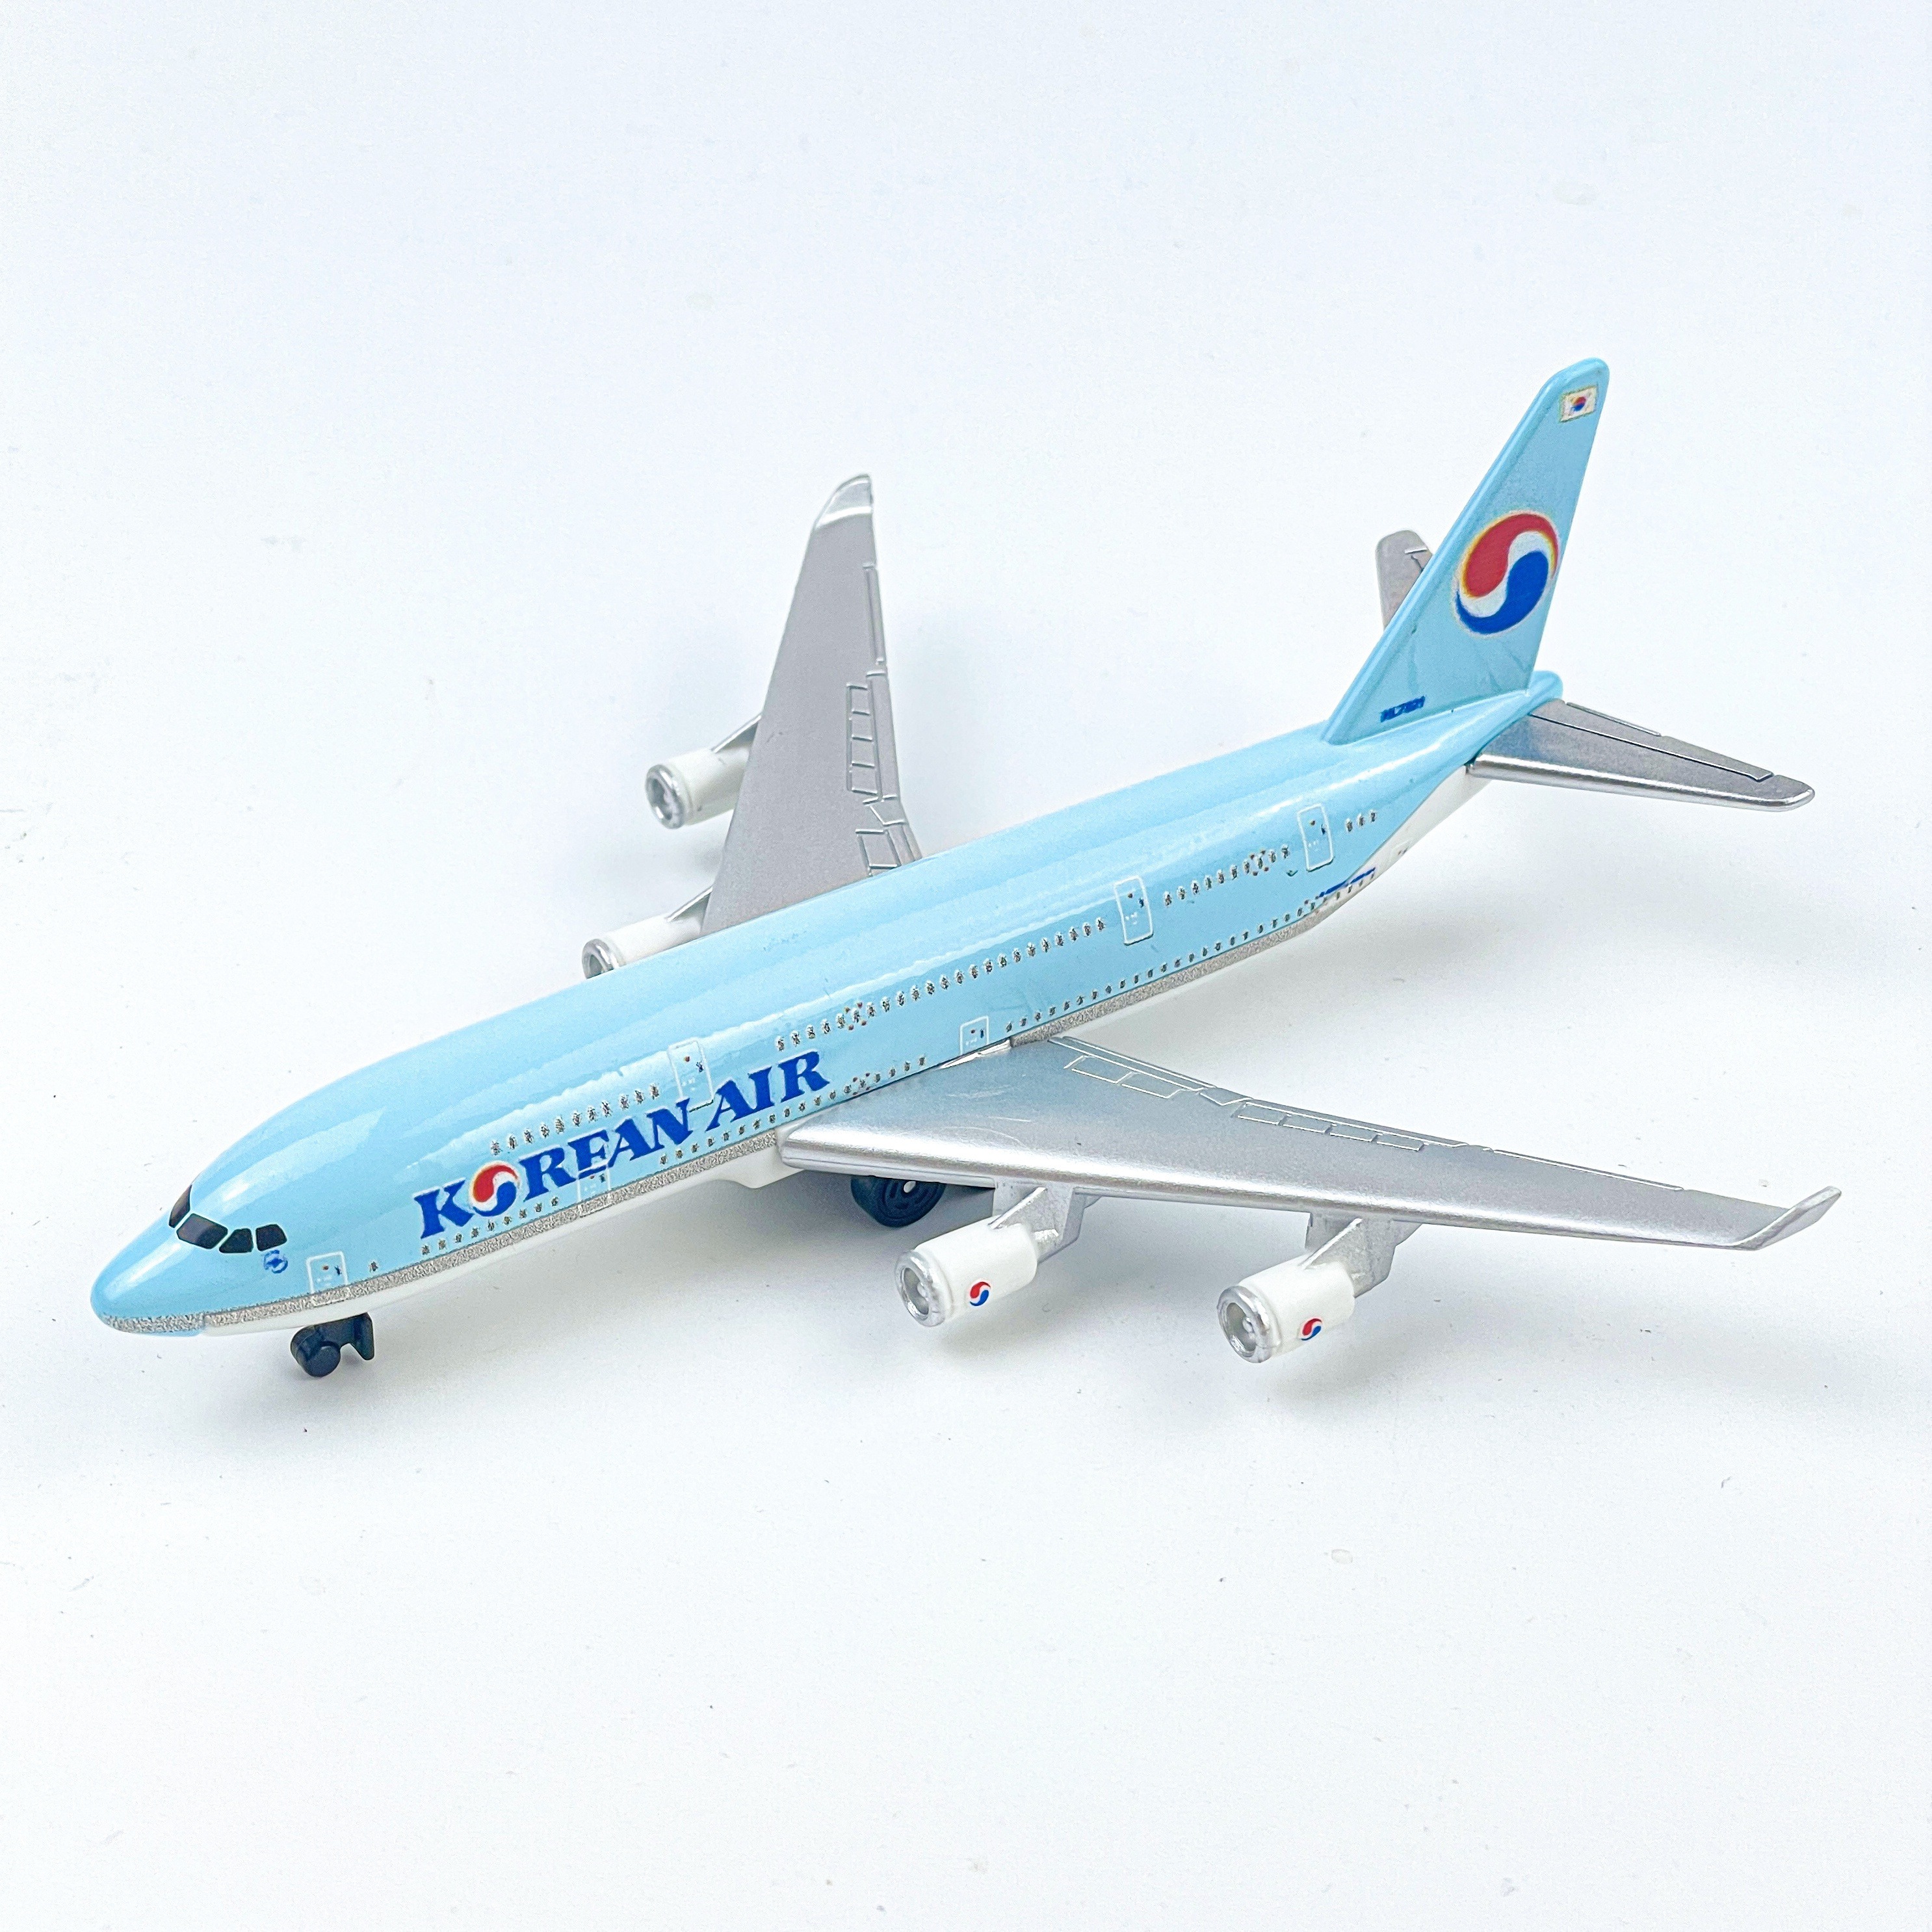 

Diecast Aircraft Model Toy, Weather-resistant Metal Push-plane, Collectible & Gift Item, Ages 3-12